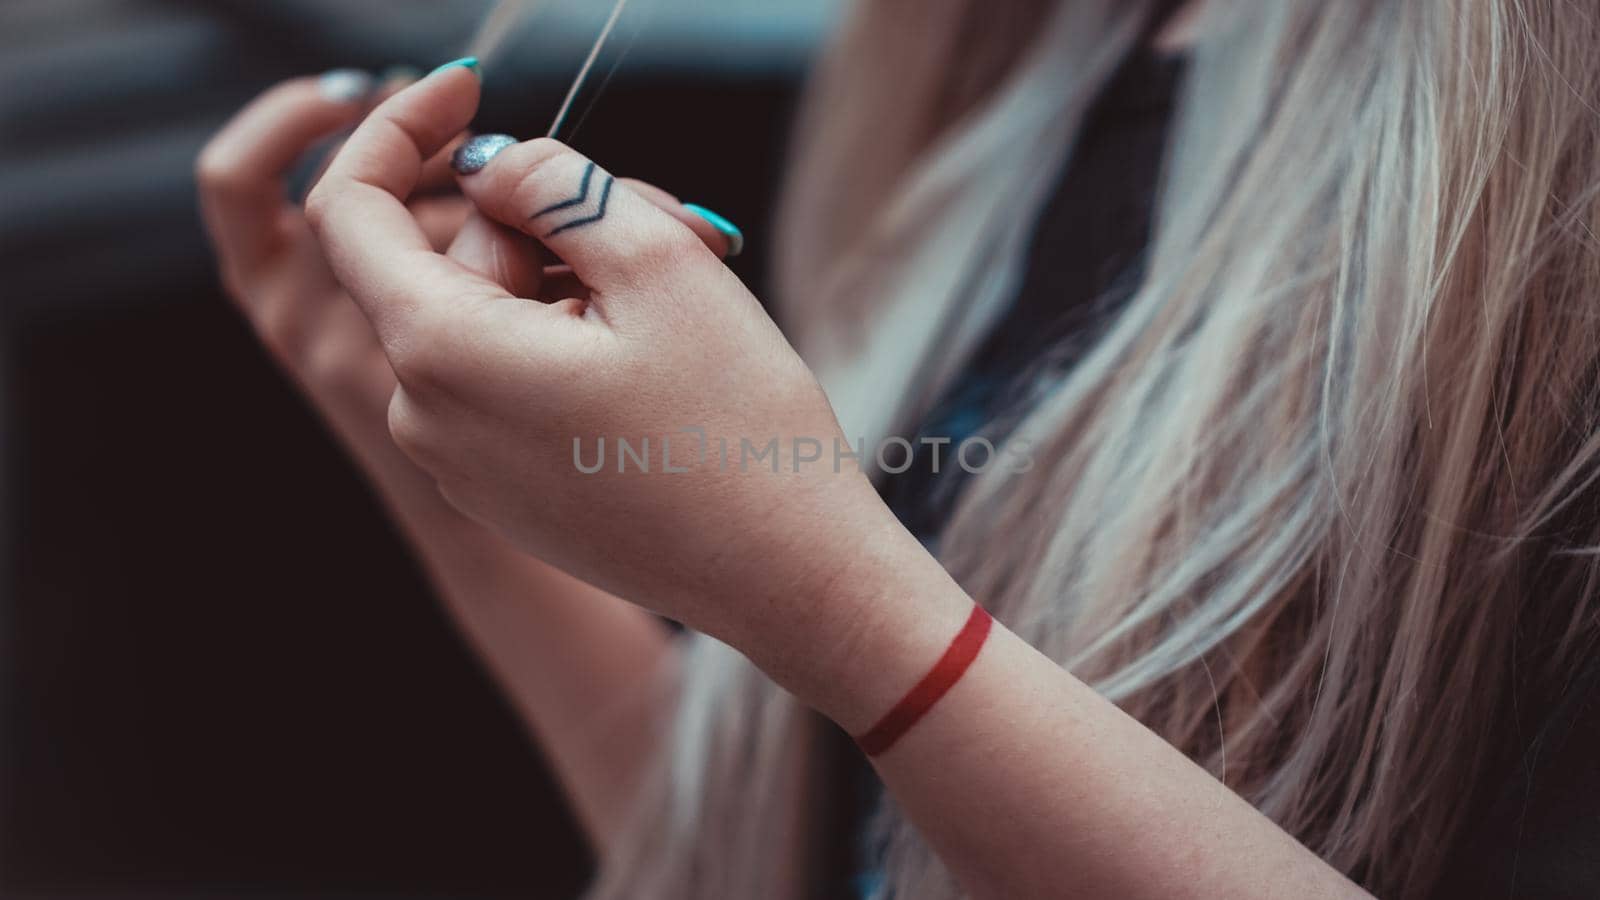 Womens hands with Arrows on the fingers, red line on the wrist - tattoos. Hipster style